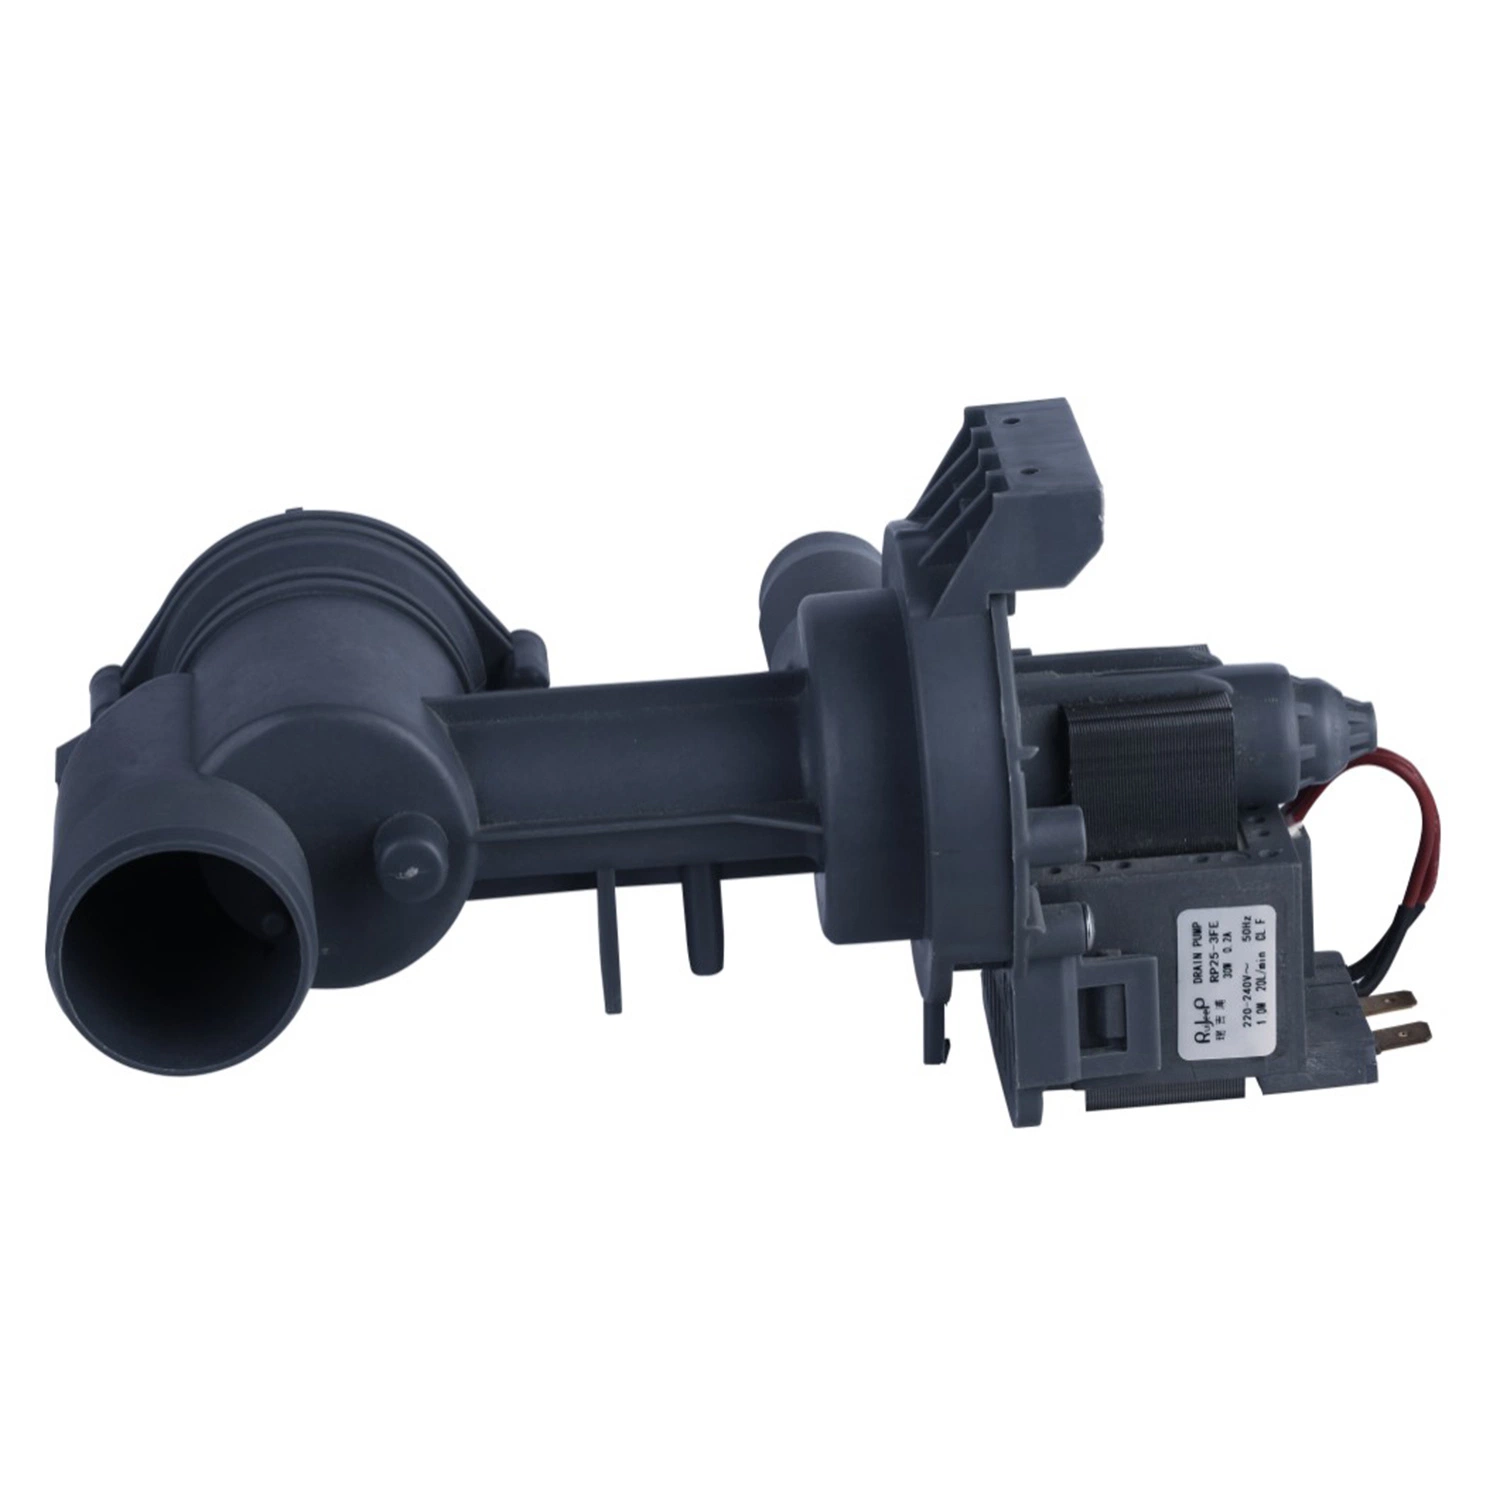 Premium 220V Universal AC Drain Pump with High Quality and 3 Year Warranty